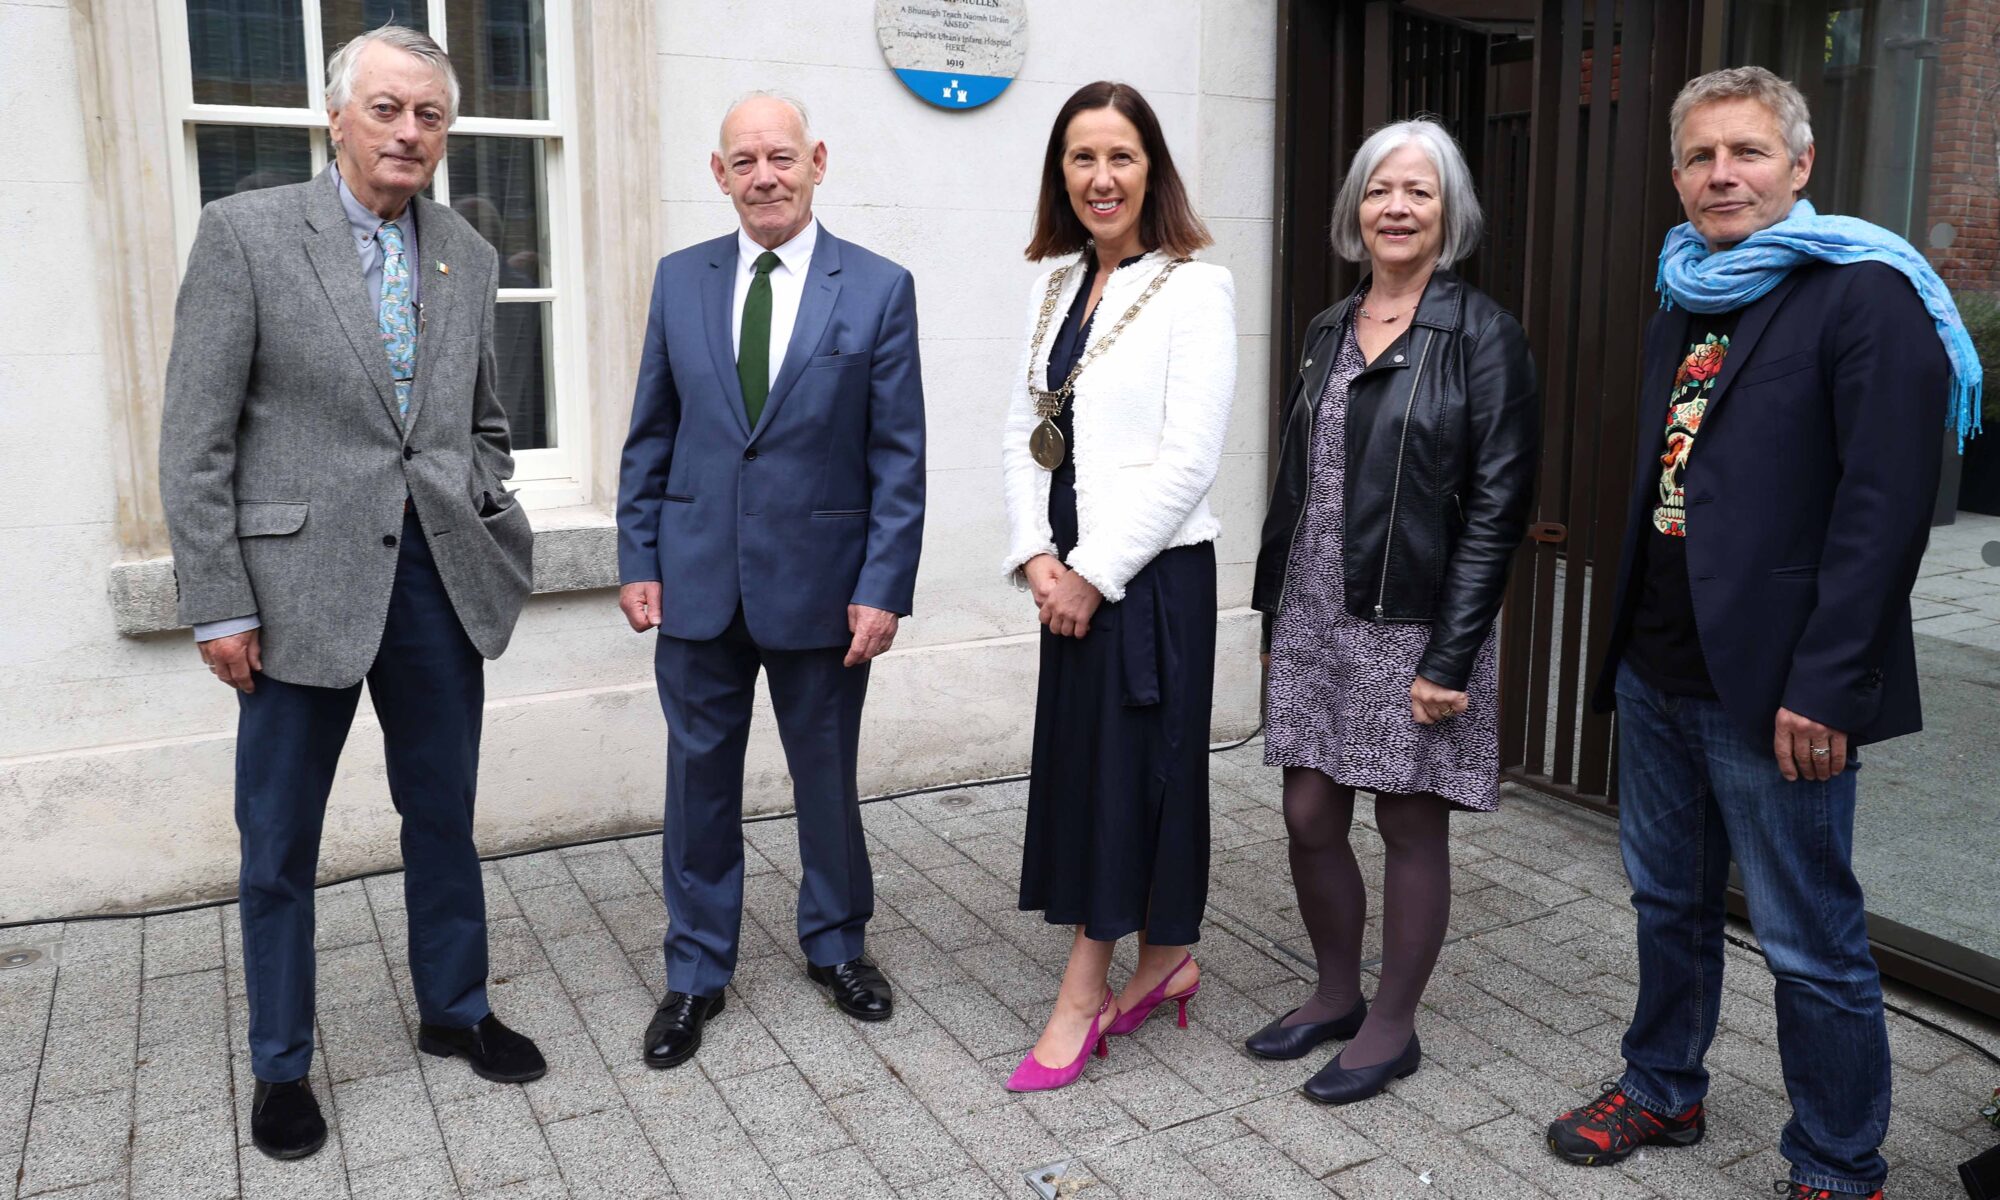 Photograph of Liam Roche, Cllr Mannix Flynn, Lord Mayor of Dublin Alison Gilliland, Dr Margaret Ward, and Paudge Behan, at the Unveiling of a commemorative plaque to Dr Kathleen Lynn & Madeline ffrench-Mullen.